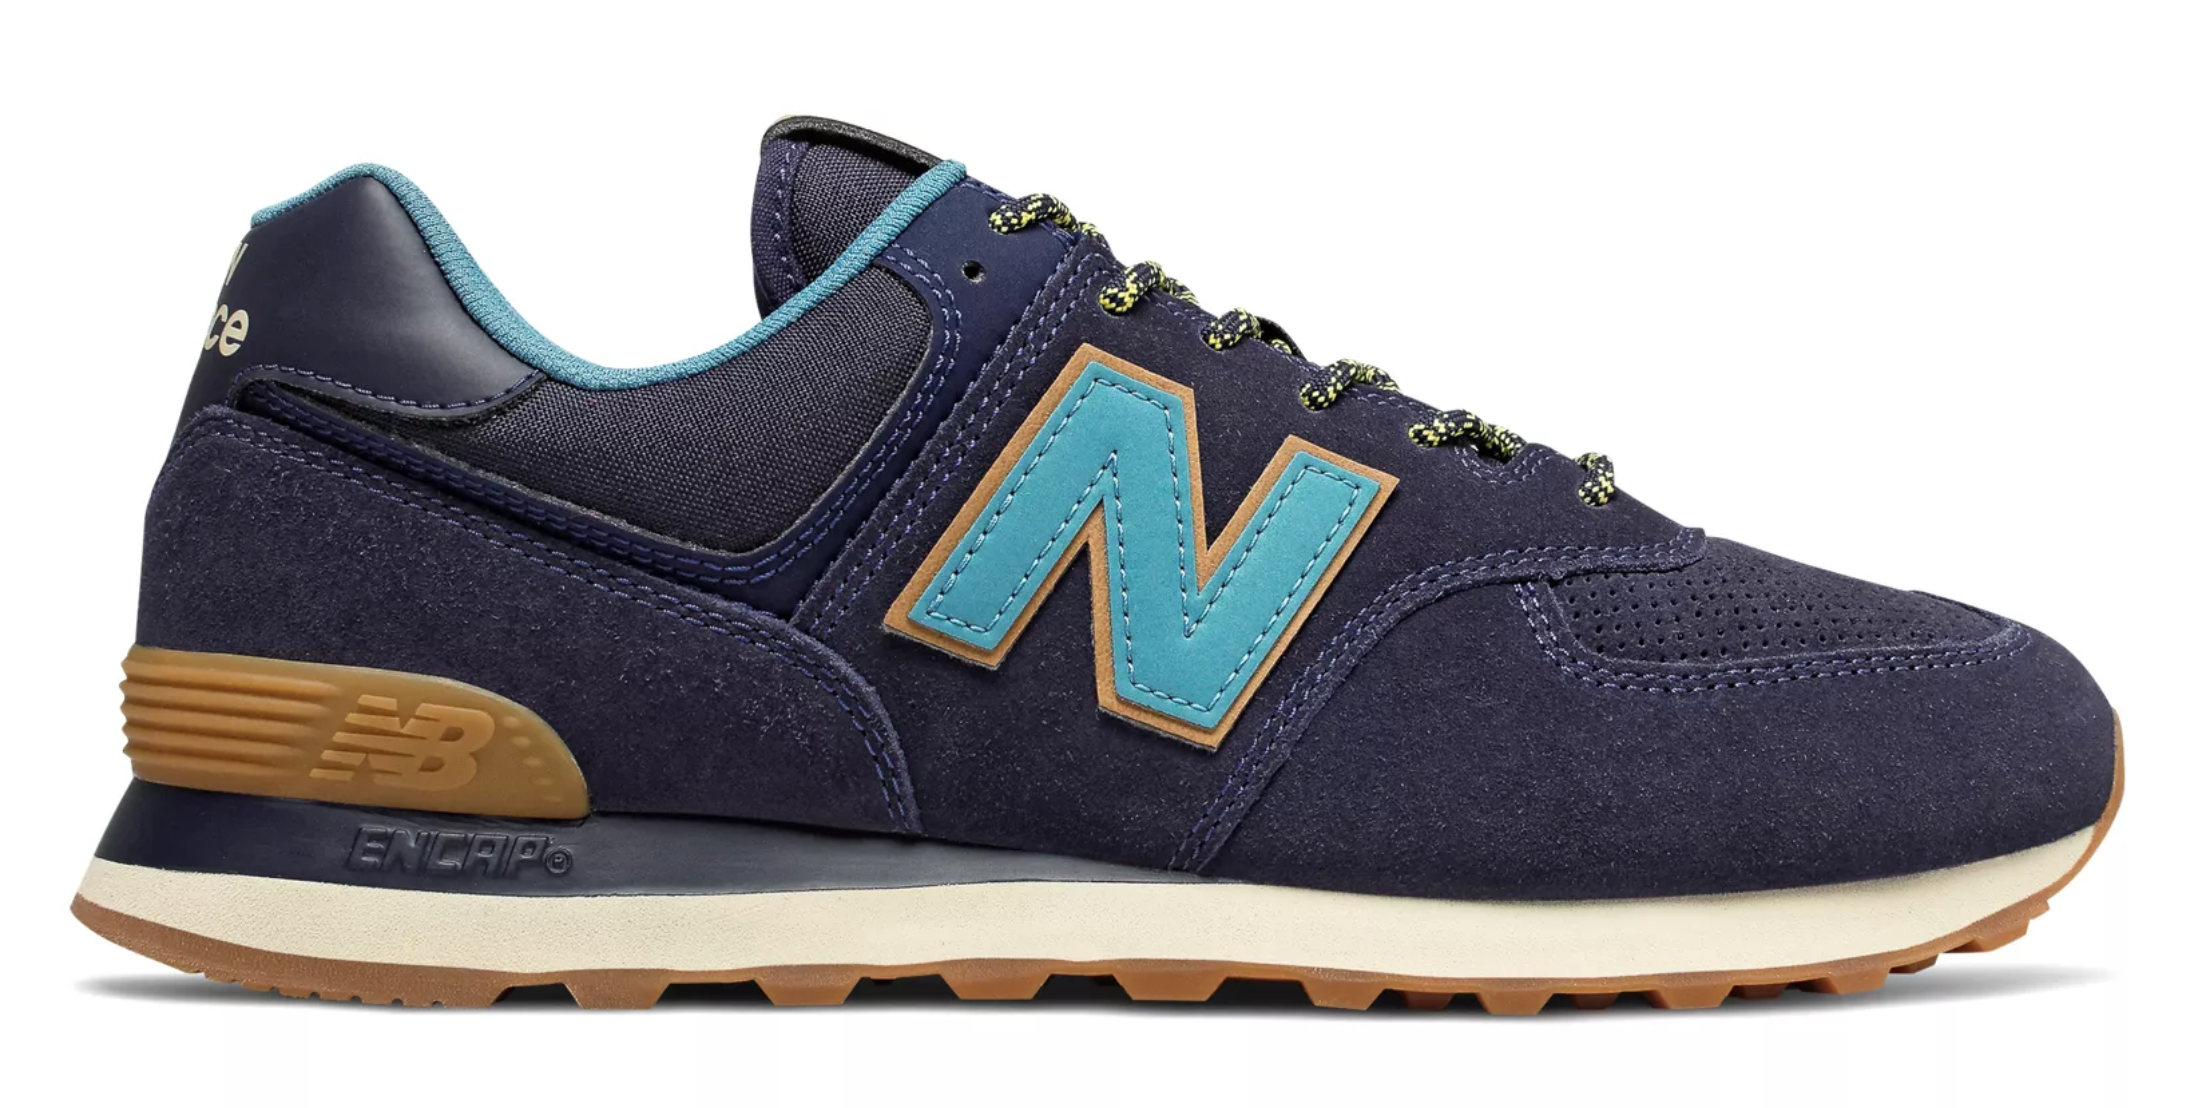 New Balance 574 Shoes - Latest Styles and Best Deals